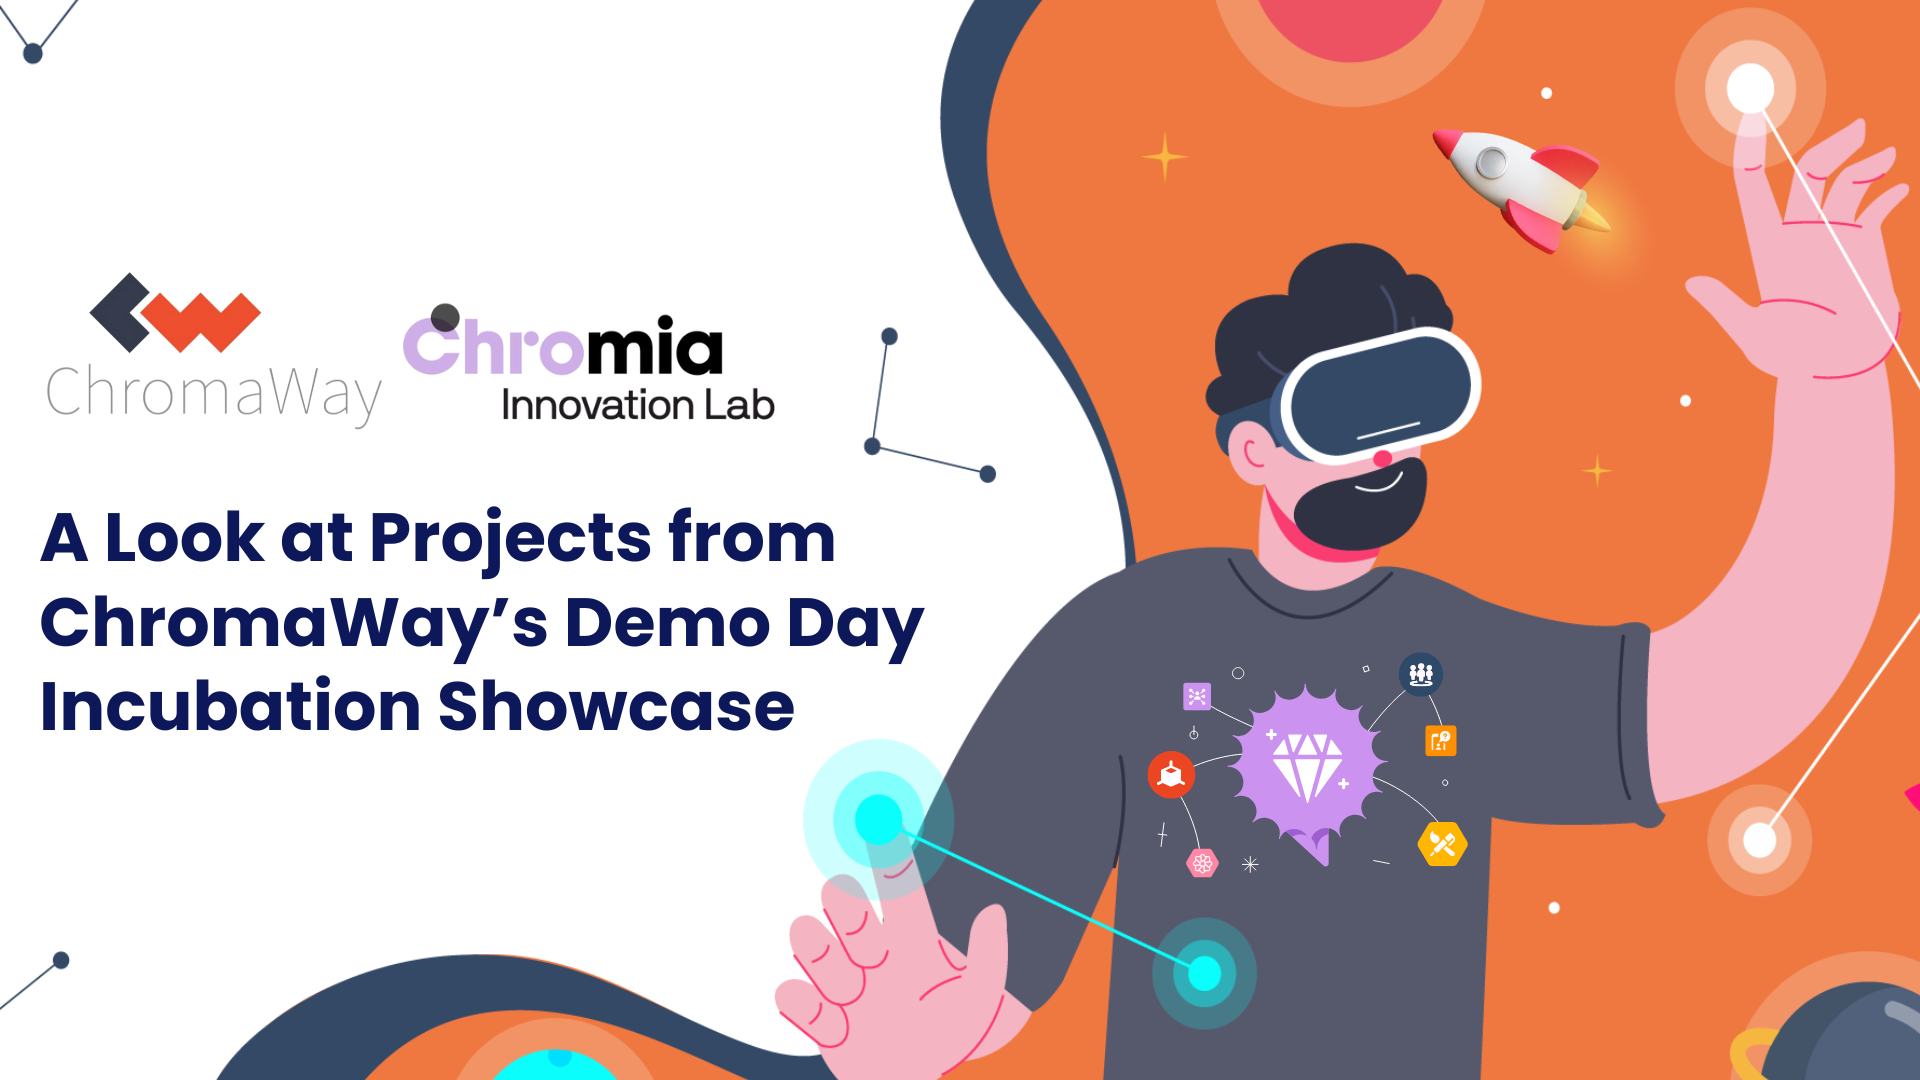 A Look at 12 Projects from ChromaWay’s Demo Day Incubation Showcase